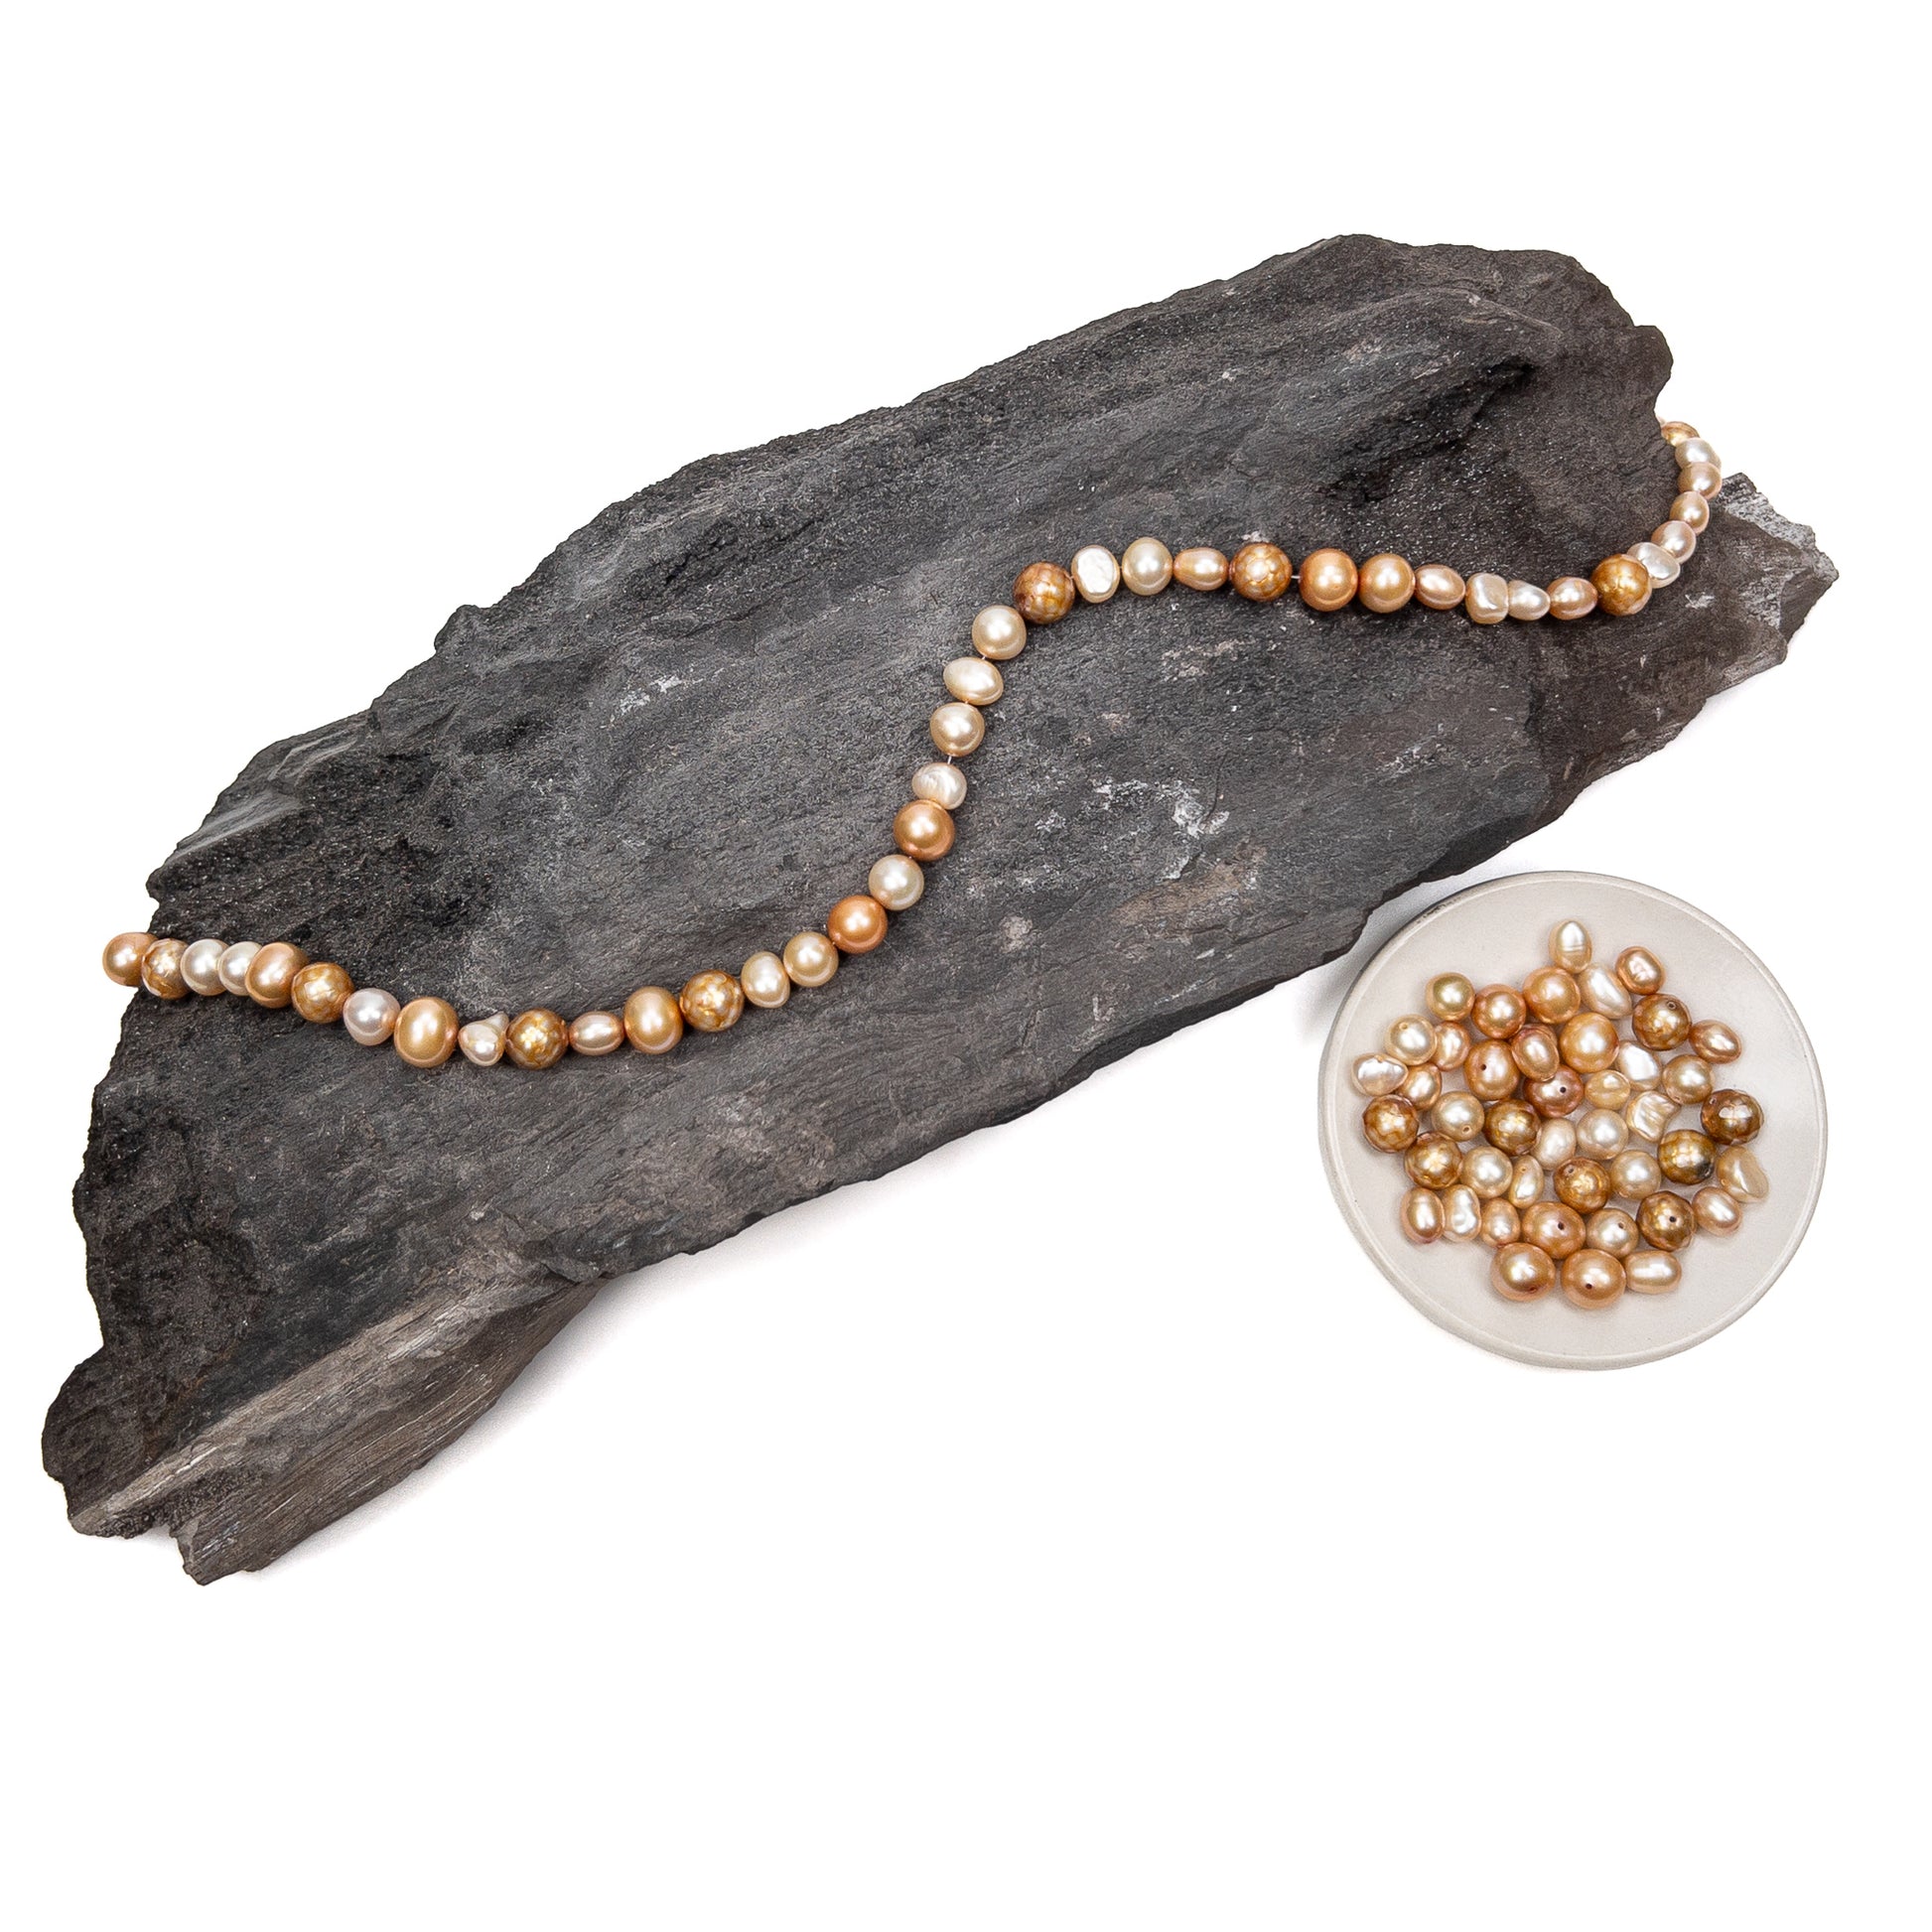 Freshwater Pearl Mix (Stepping Stones) - 70 pcs.